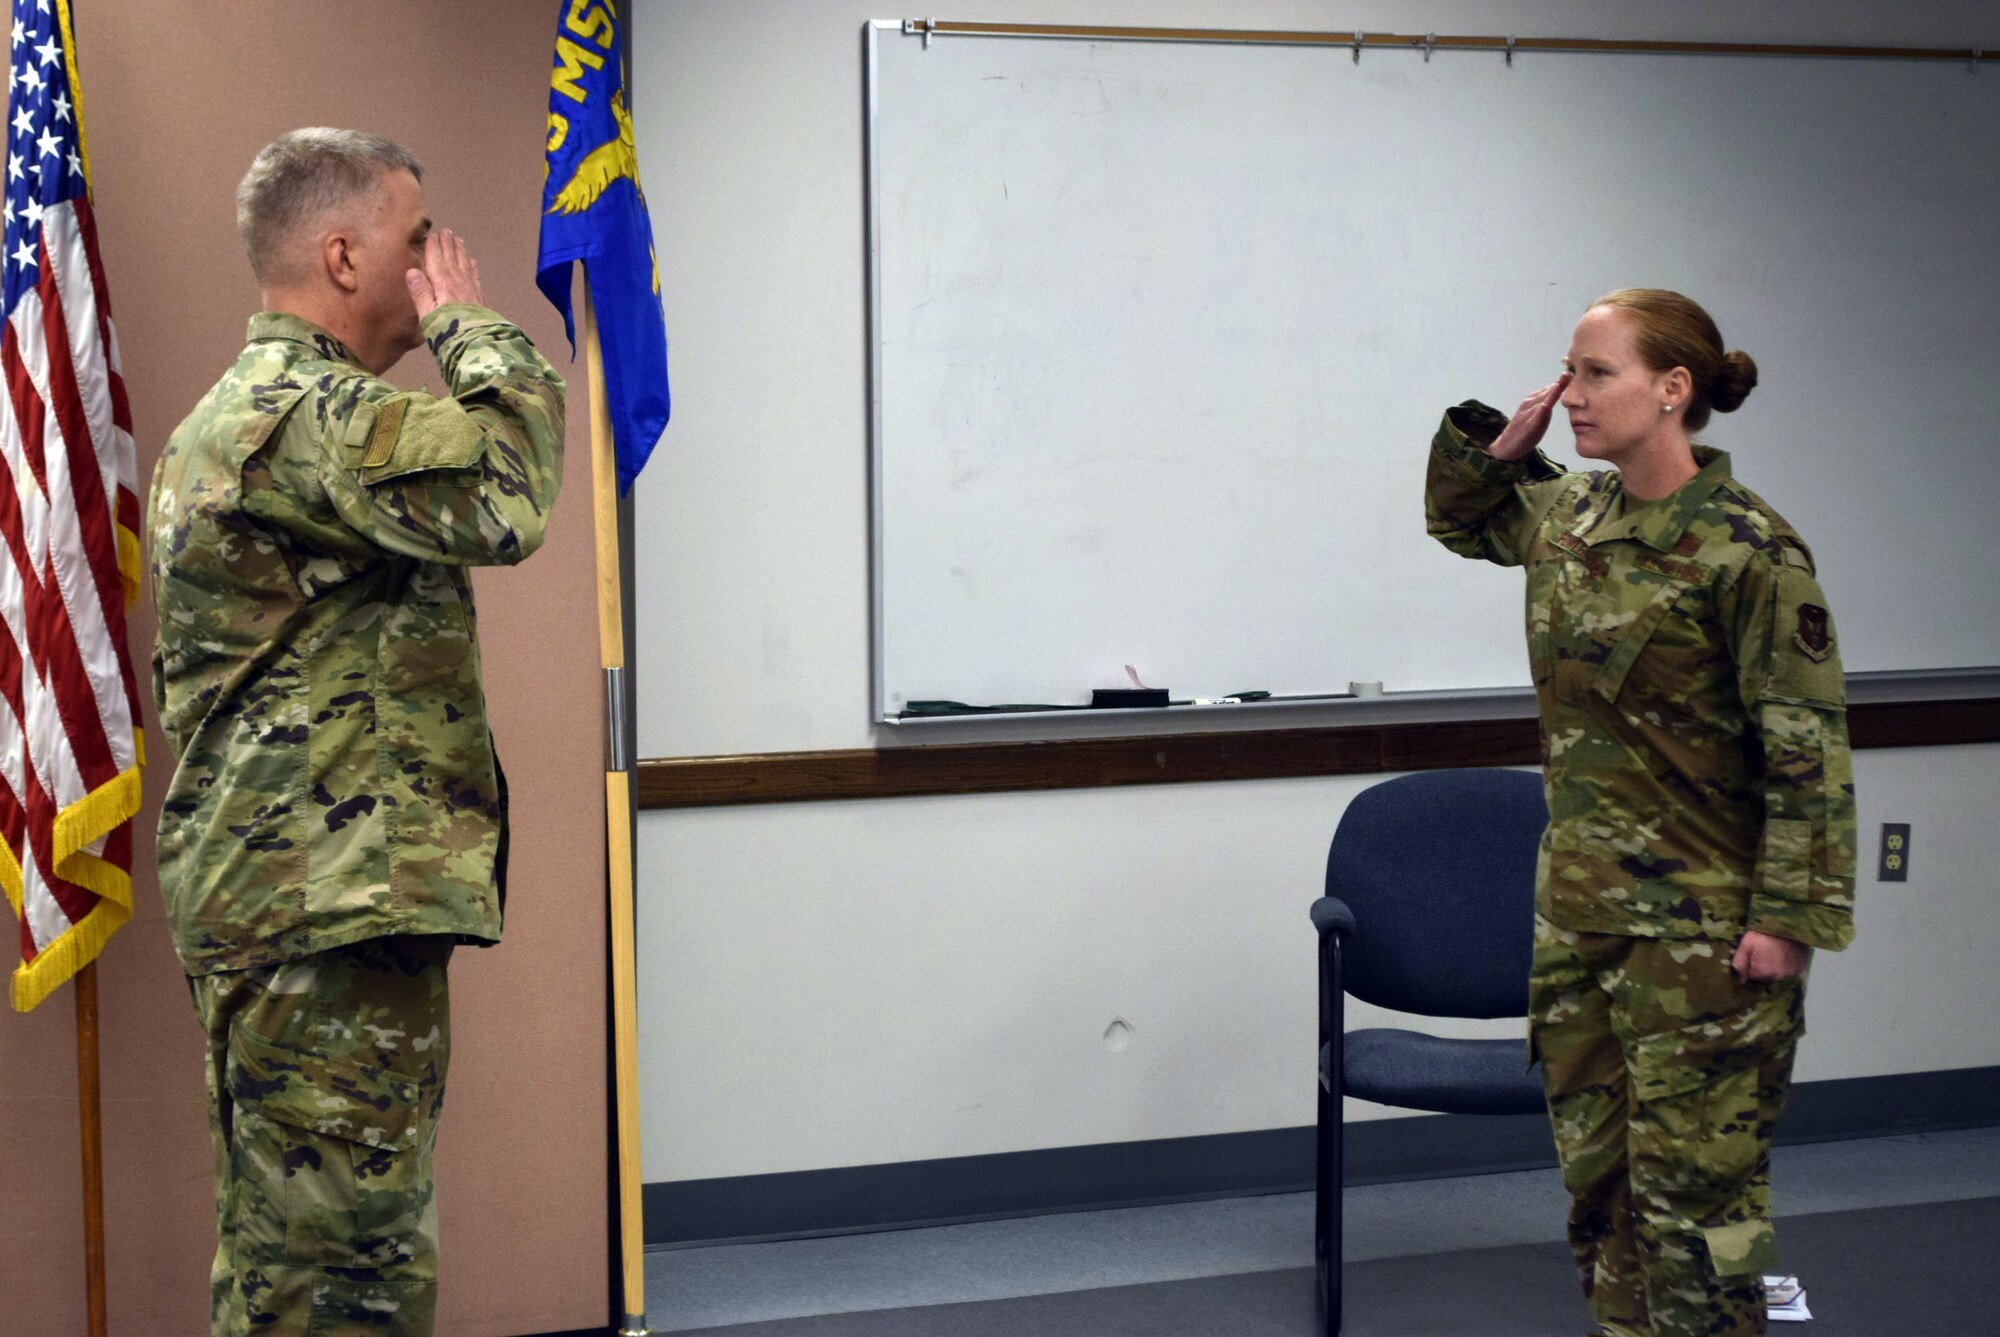 Maj. Kristen B. Fowler, 74th Aerial Port Squadron commander (right), salutes Col. Wayne M. Williams, 433rd Mission Support Group commander, during a change of command ceremony at Joint Base San Antonio-Lackland, Texas, June 6, 2020.